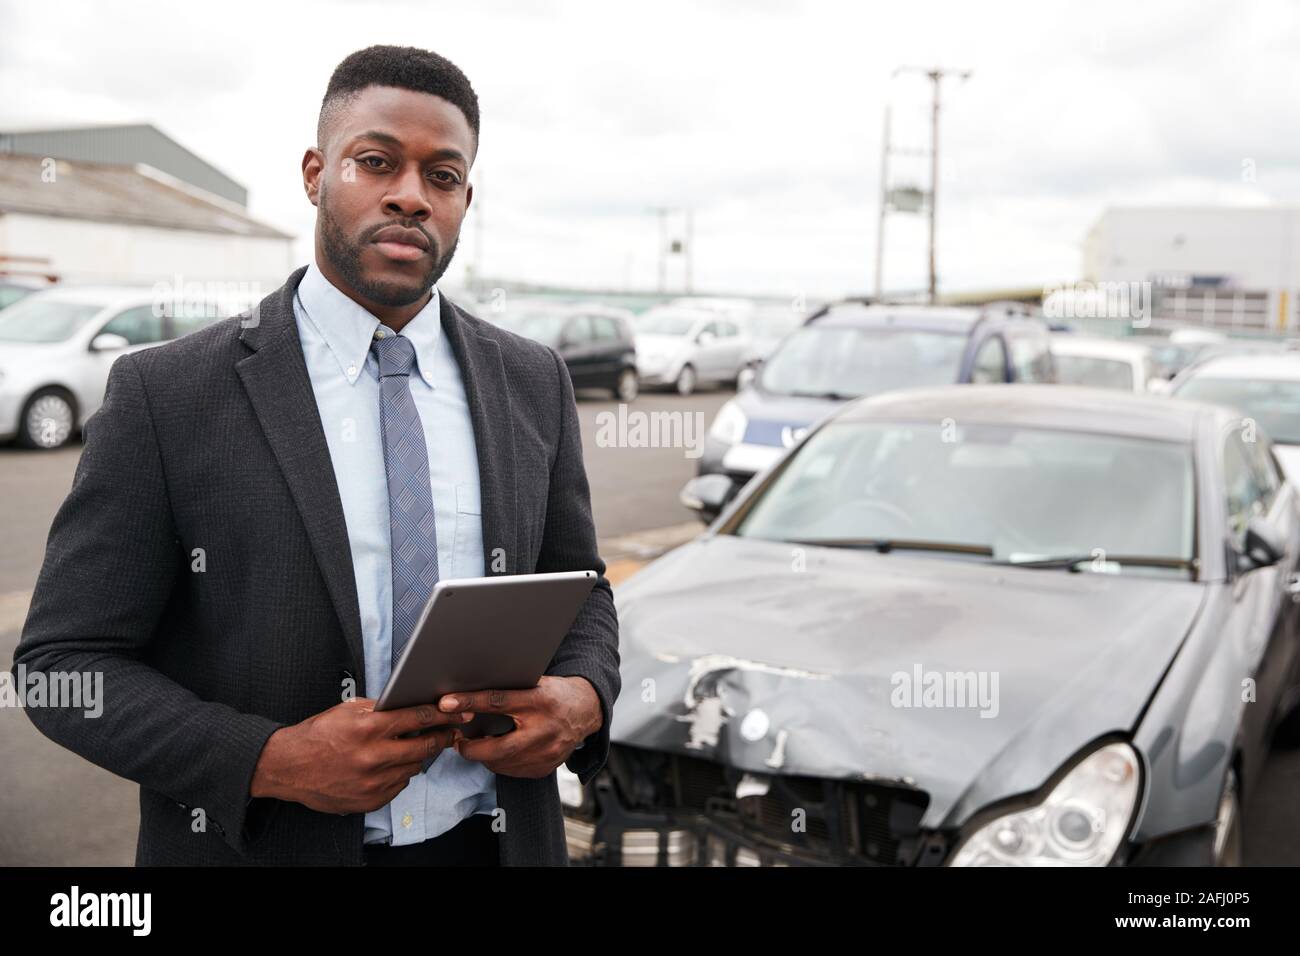 Portrait Of Insurance Loss Adjuster With Digital Tablet Inspecting Damage To Car From Motor Accident Stock Photo